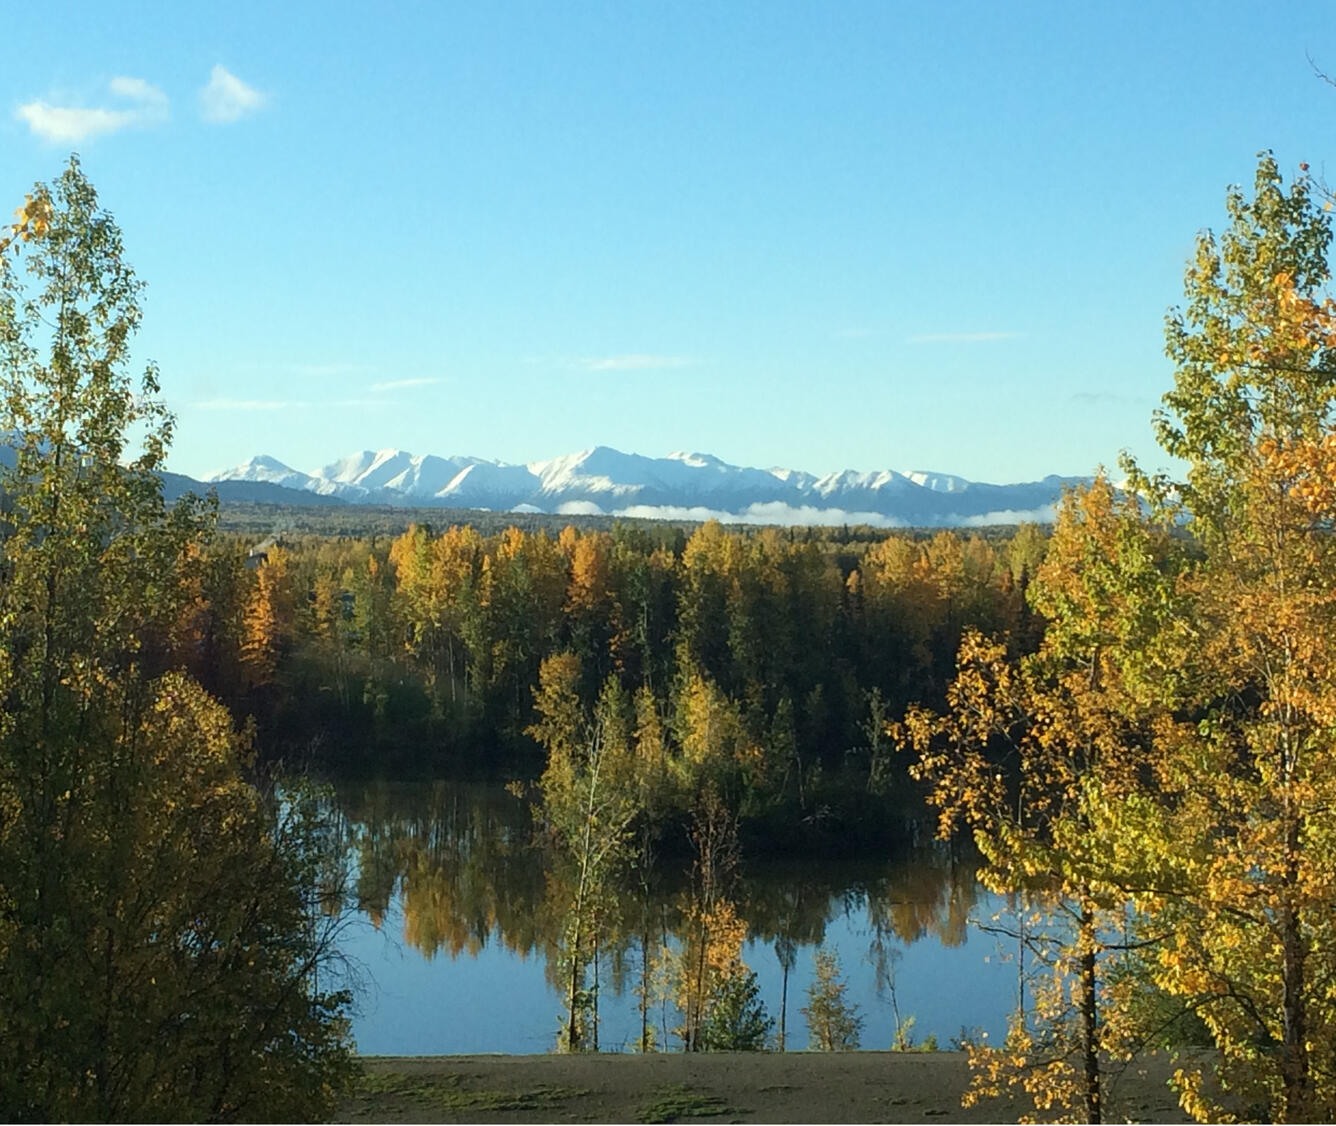 View of trees across University Lake from the Alaska Science Center in Anchorage, Alaska